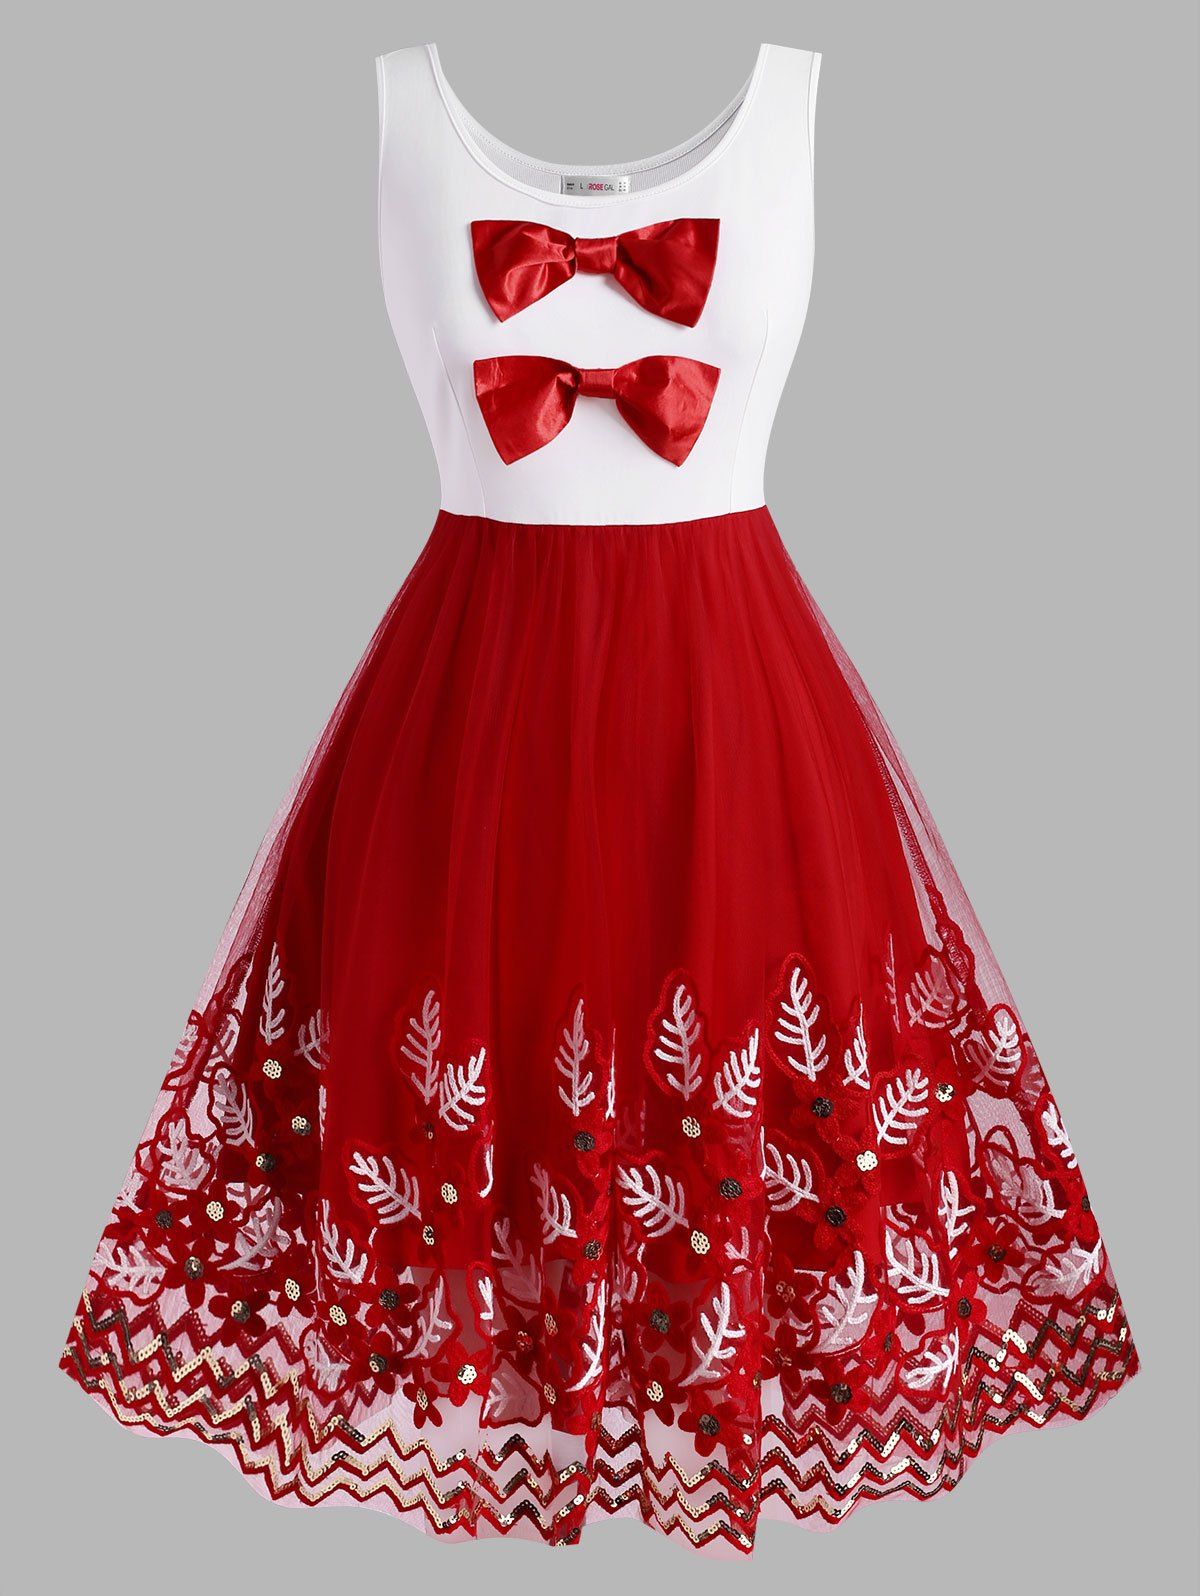 Bowknot Plant Embroidered Sequins Christmas Plus Size Dress - RED 4X